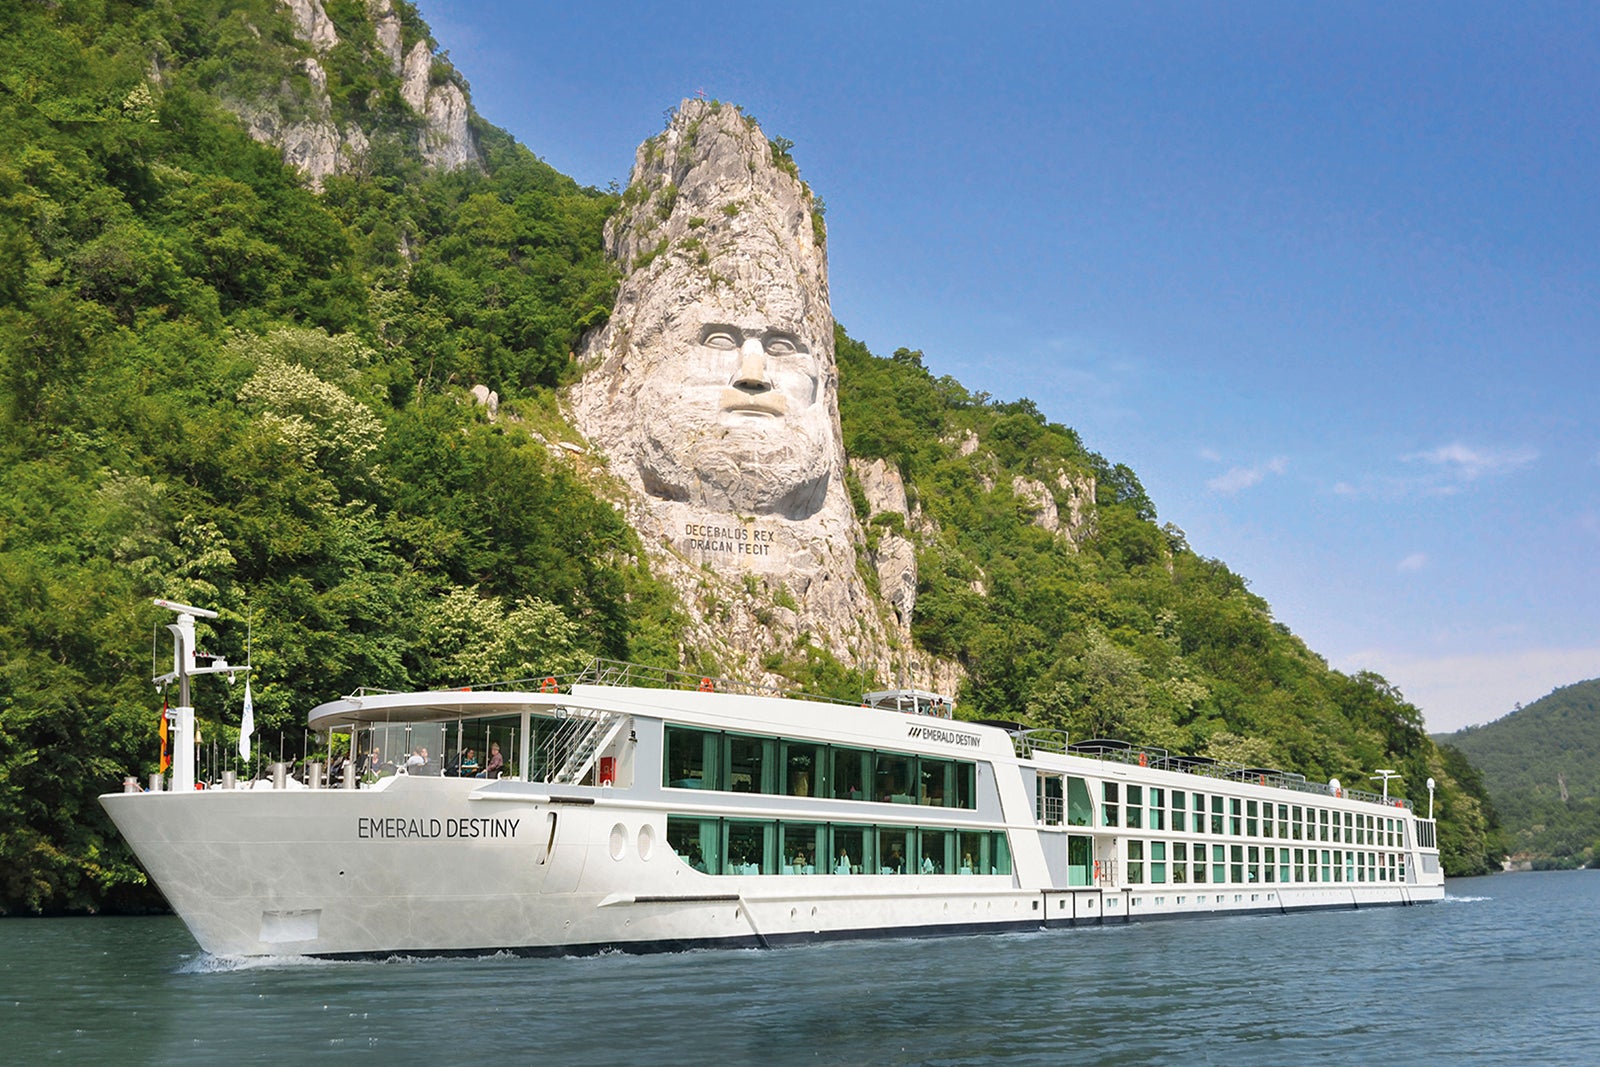 which river cruise lines are you aware of